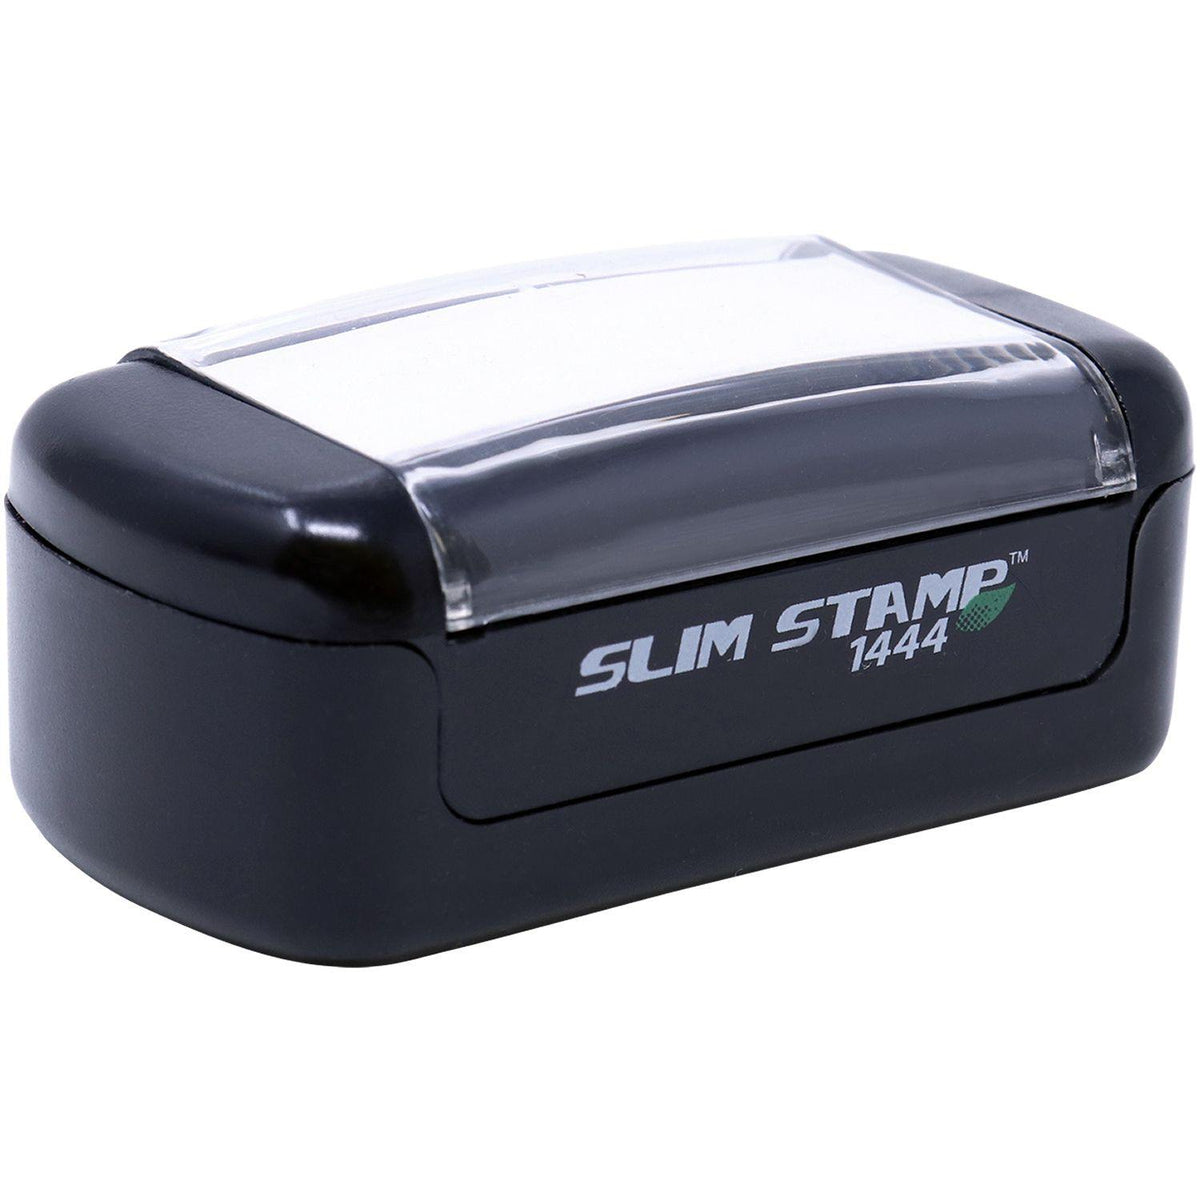 Alt View of Slim Pre-Inked Unclaimed Stamp Mount Angle